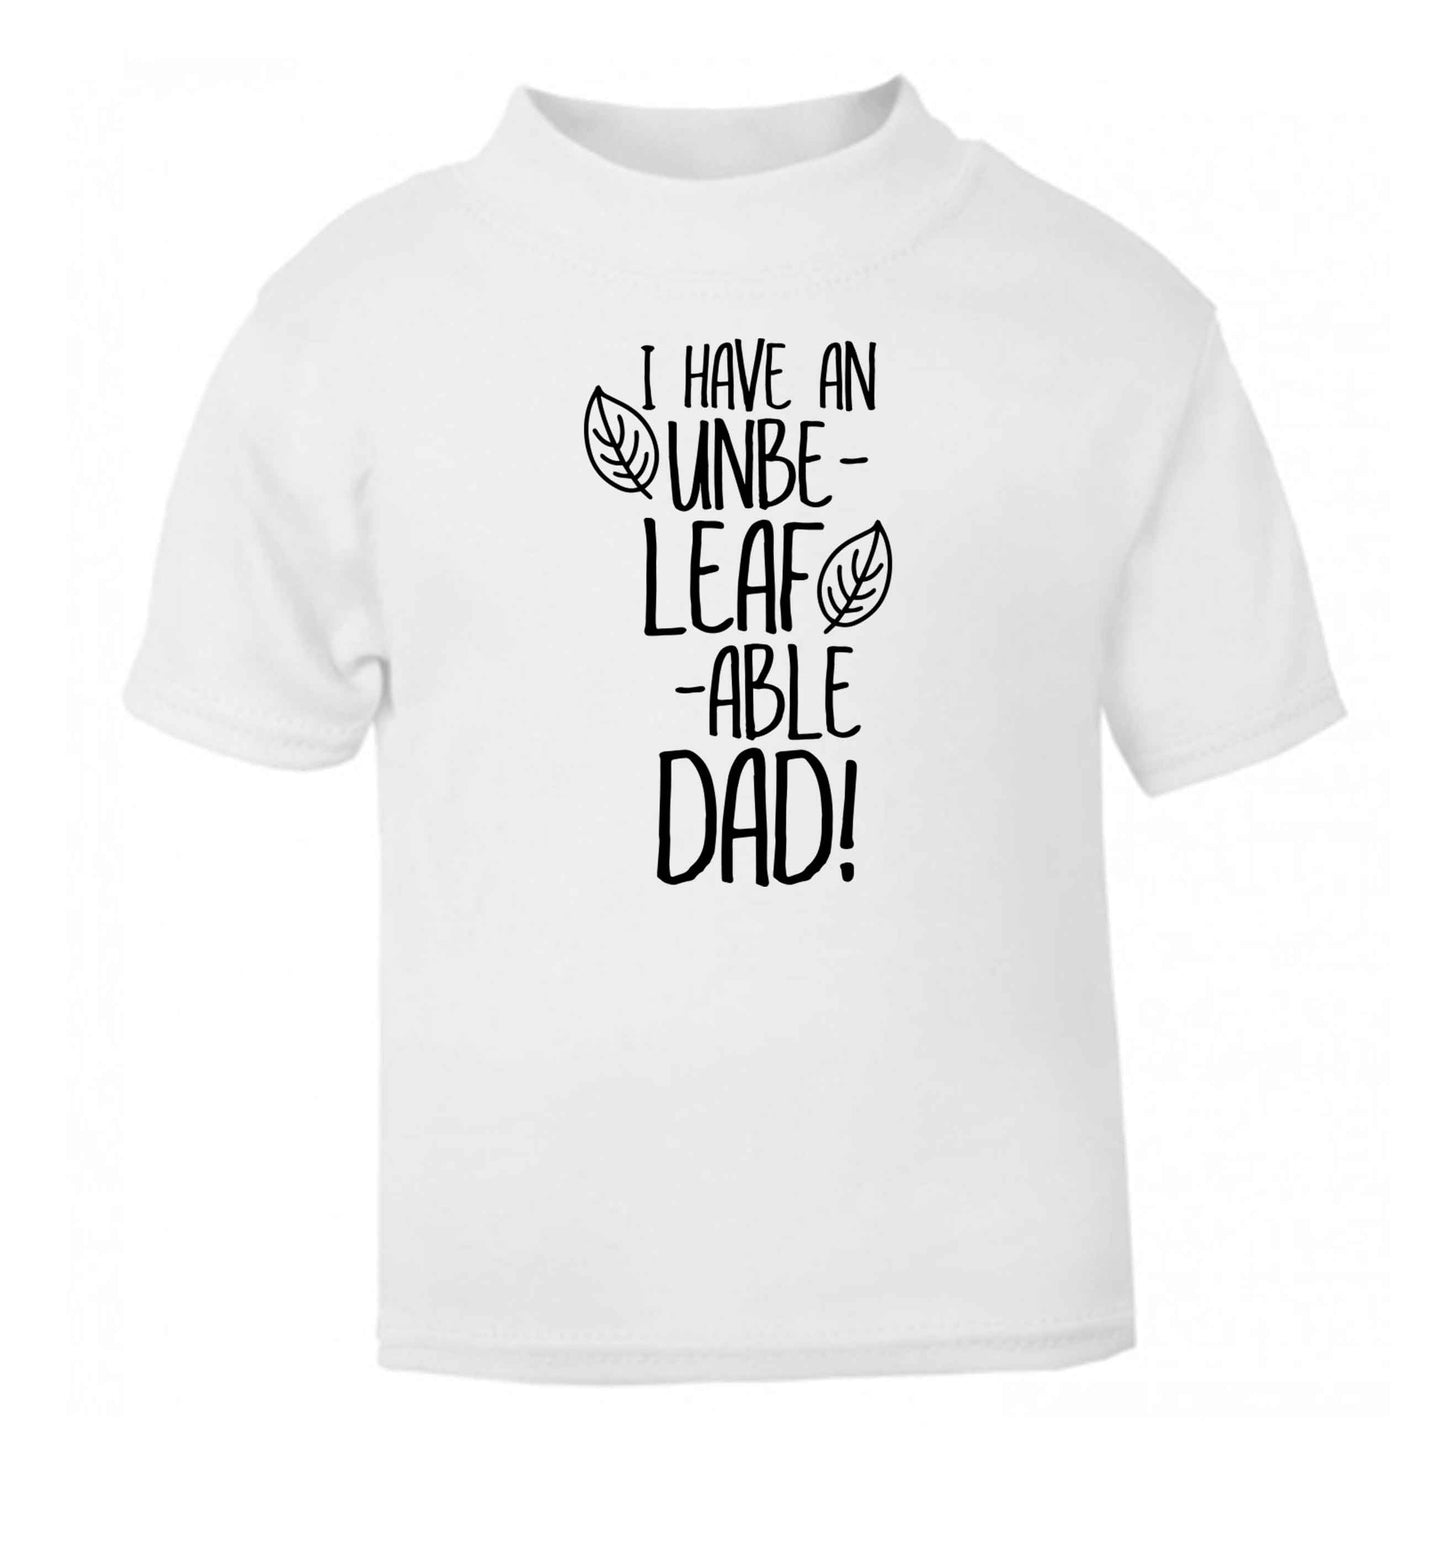 I have an unbe-leaf-able dad white Baby Toddler Tshirt 2 Years